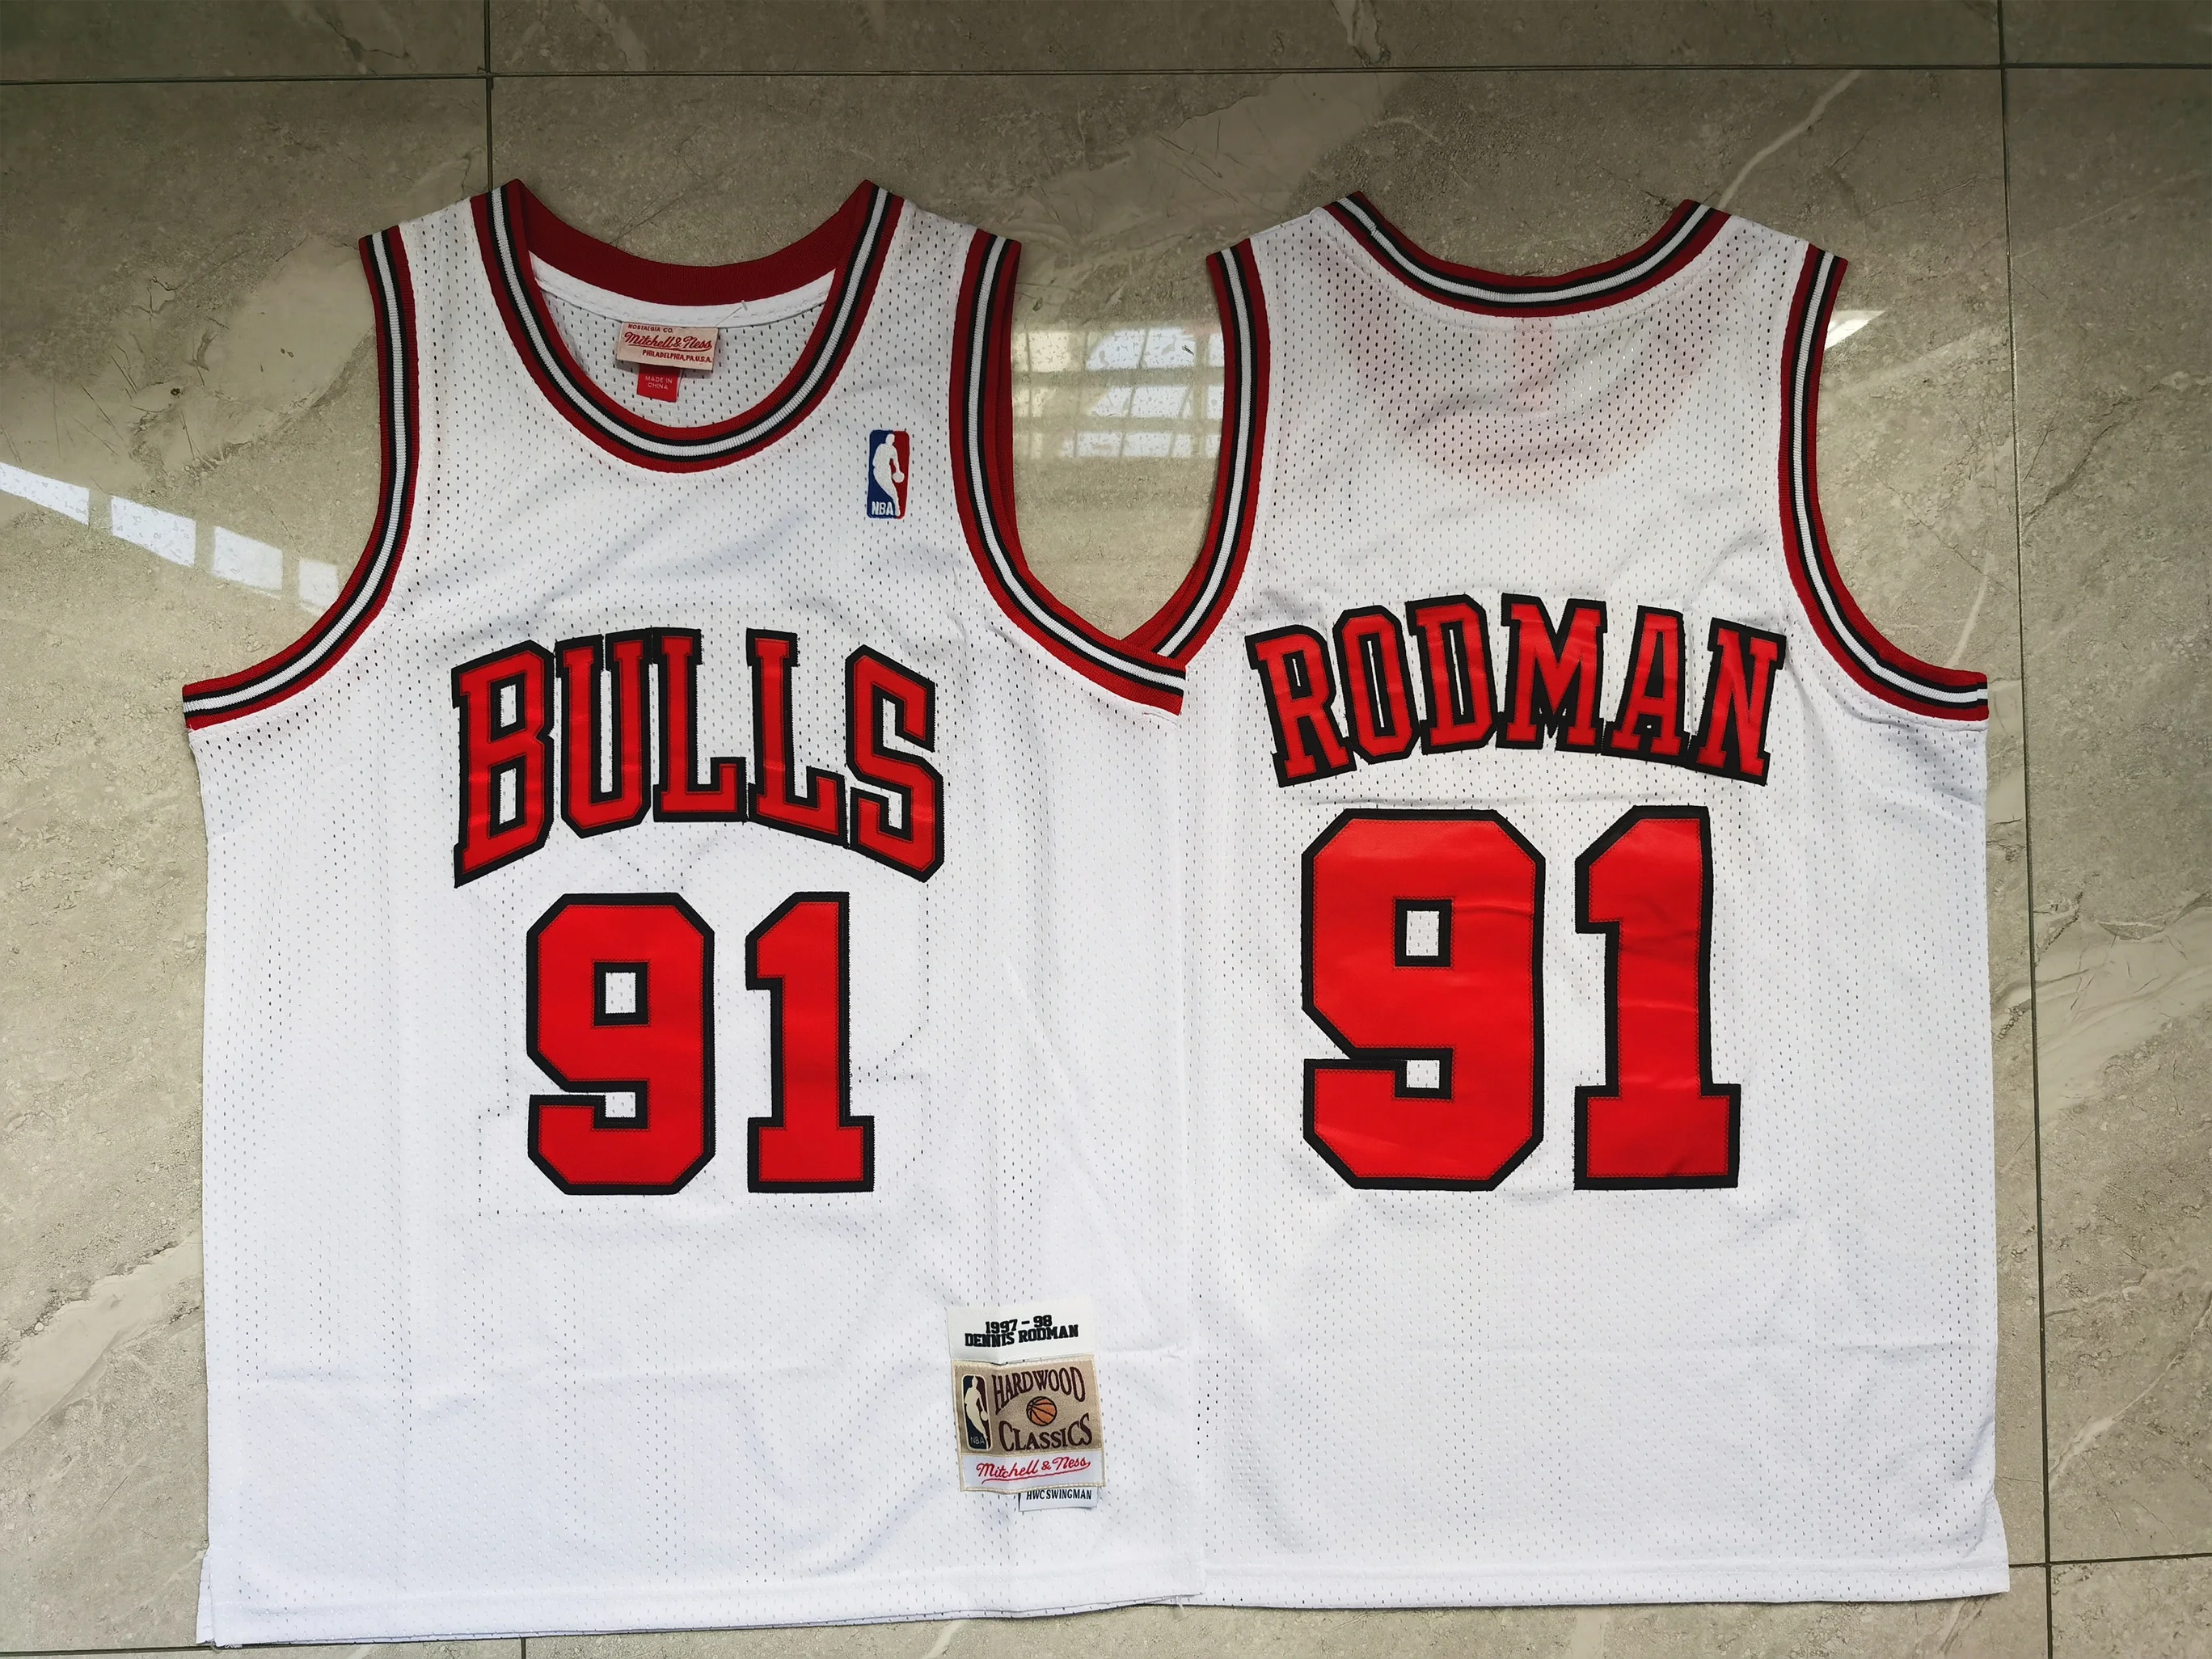 

Chicago Bulls White No. 91 Men Basketball Uniform Sports Men Clothing Casual Sports Quick Dry Breathable City Training Top